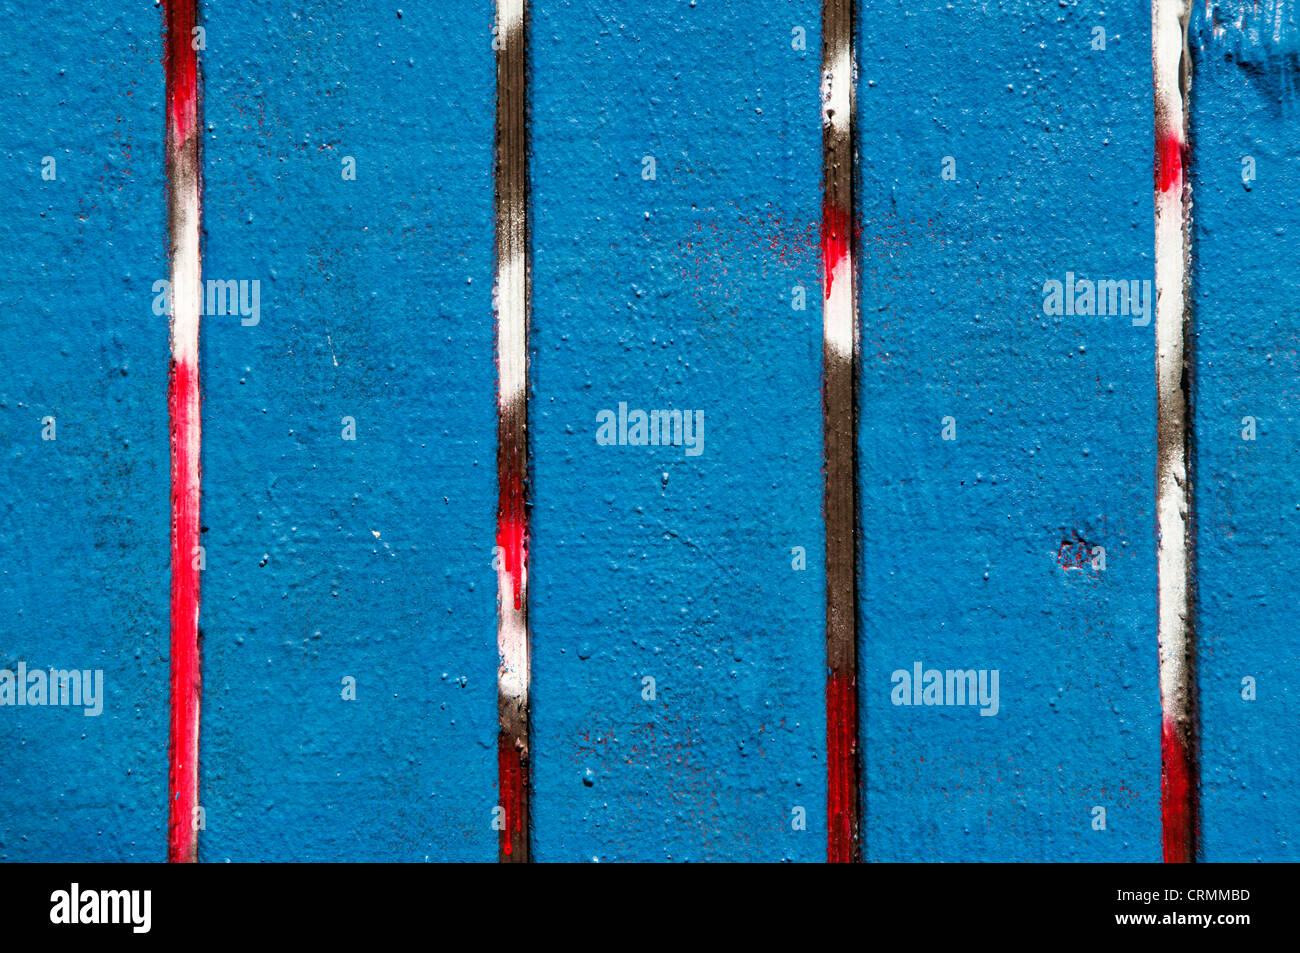 Painted wood section of graffiti filled alley in downtown Aberdeen, Washington. Stock Photo